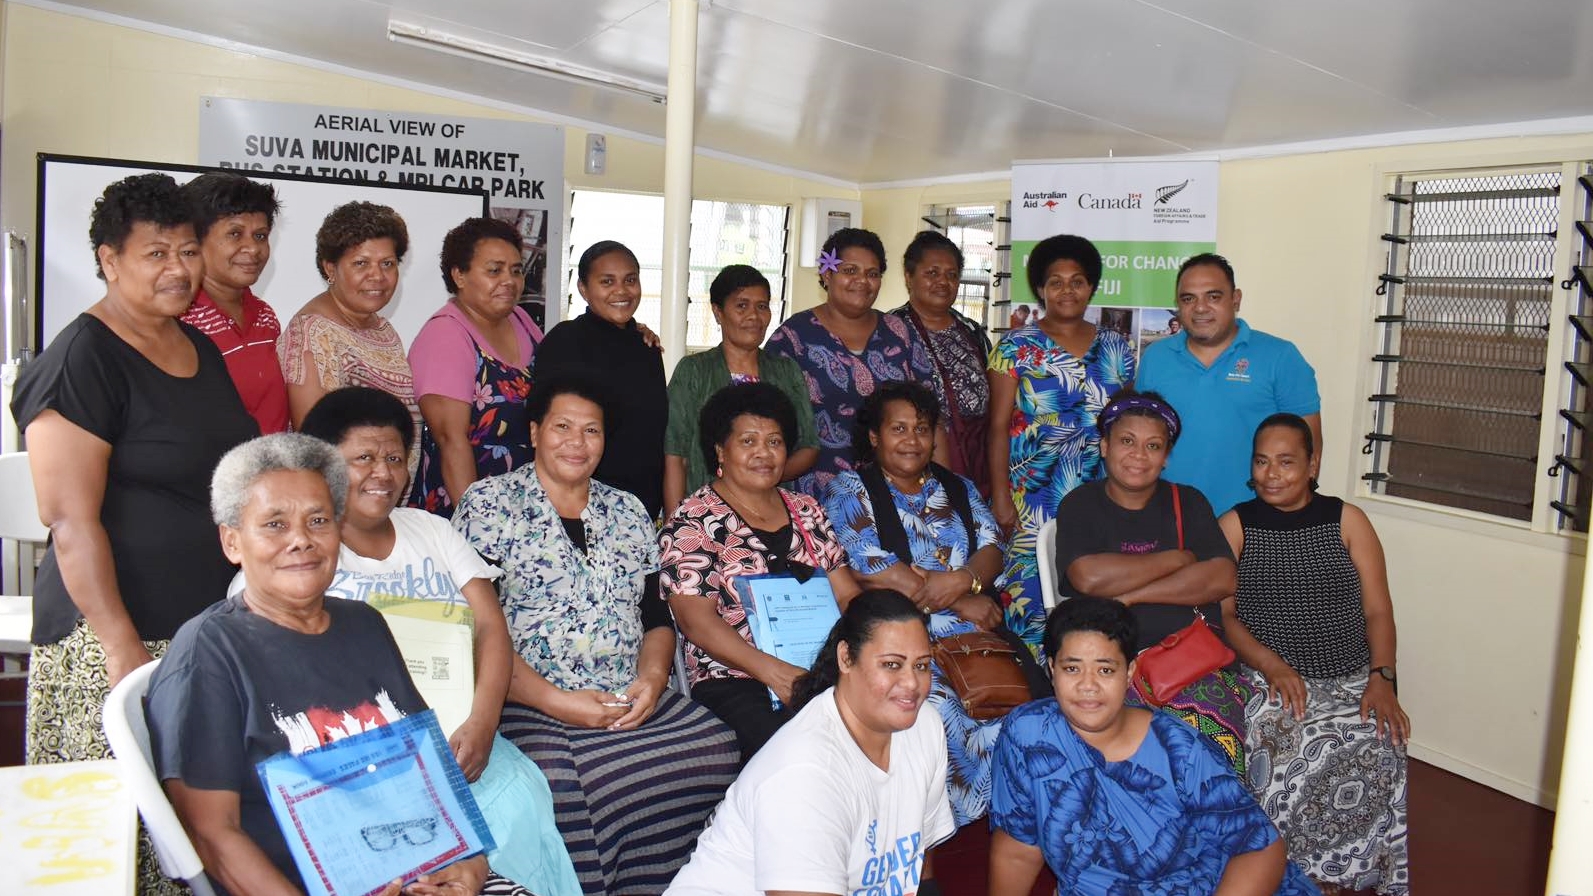 Market vendors at the Suva market promote and practice food safety in their business.